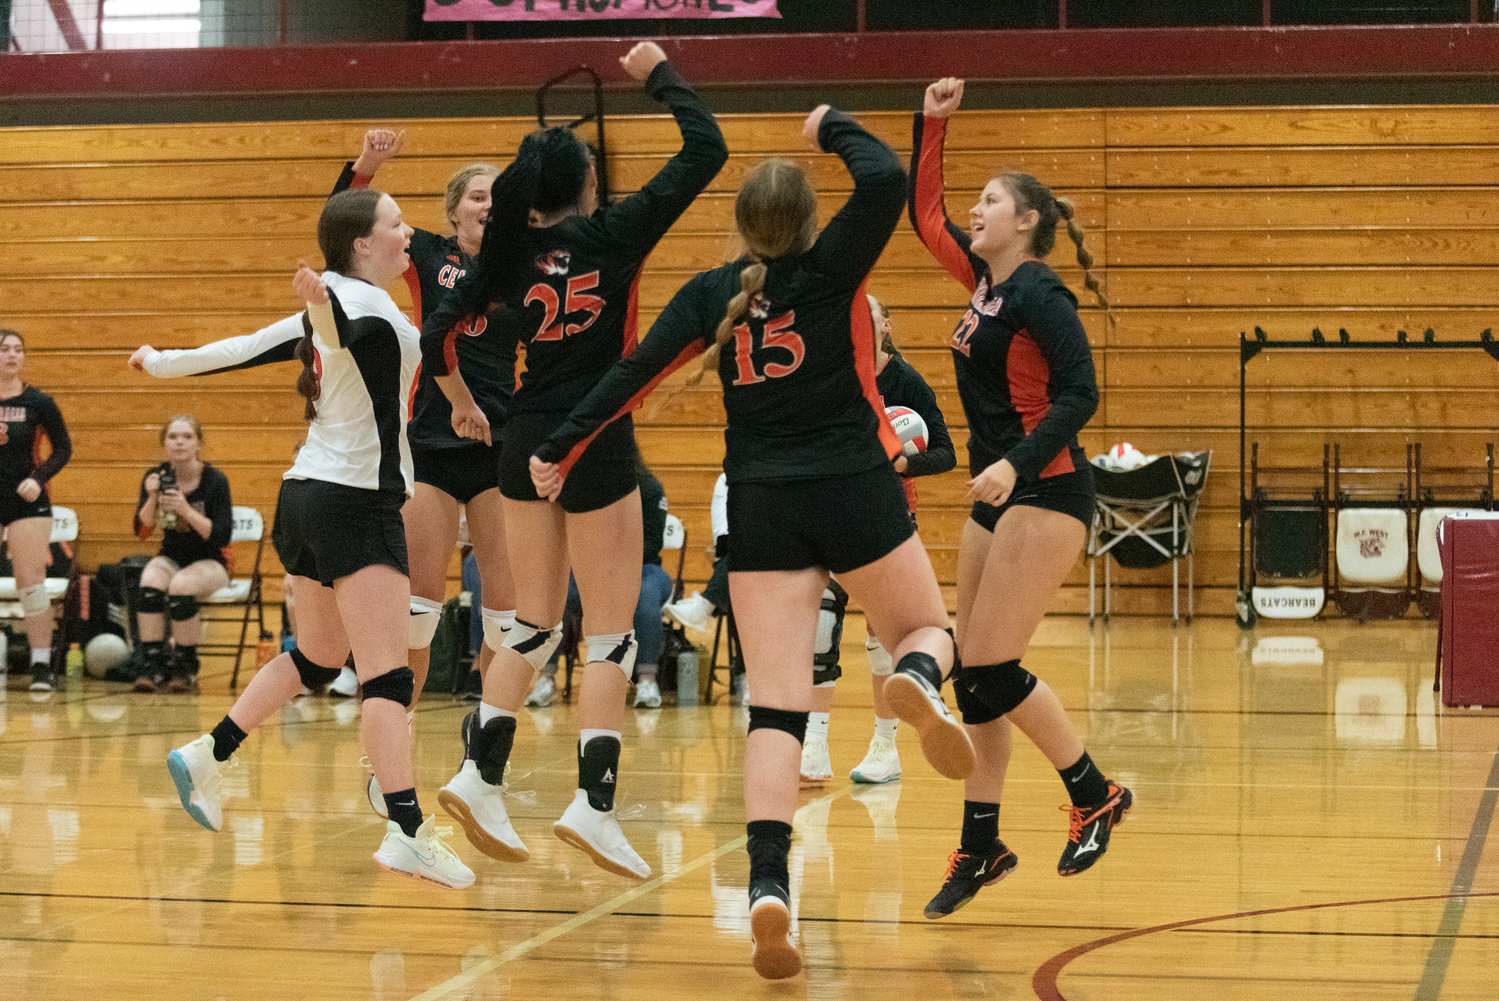 The Centralia volleyball team celebrates an ace during its loss to W.F. West on Sept. 22 in Chehalis.